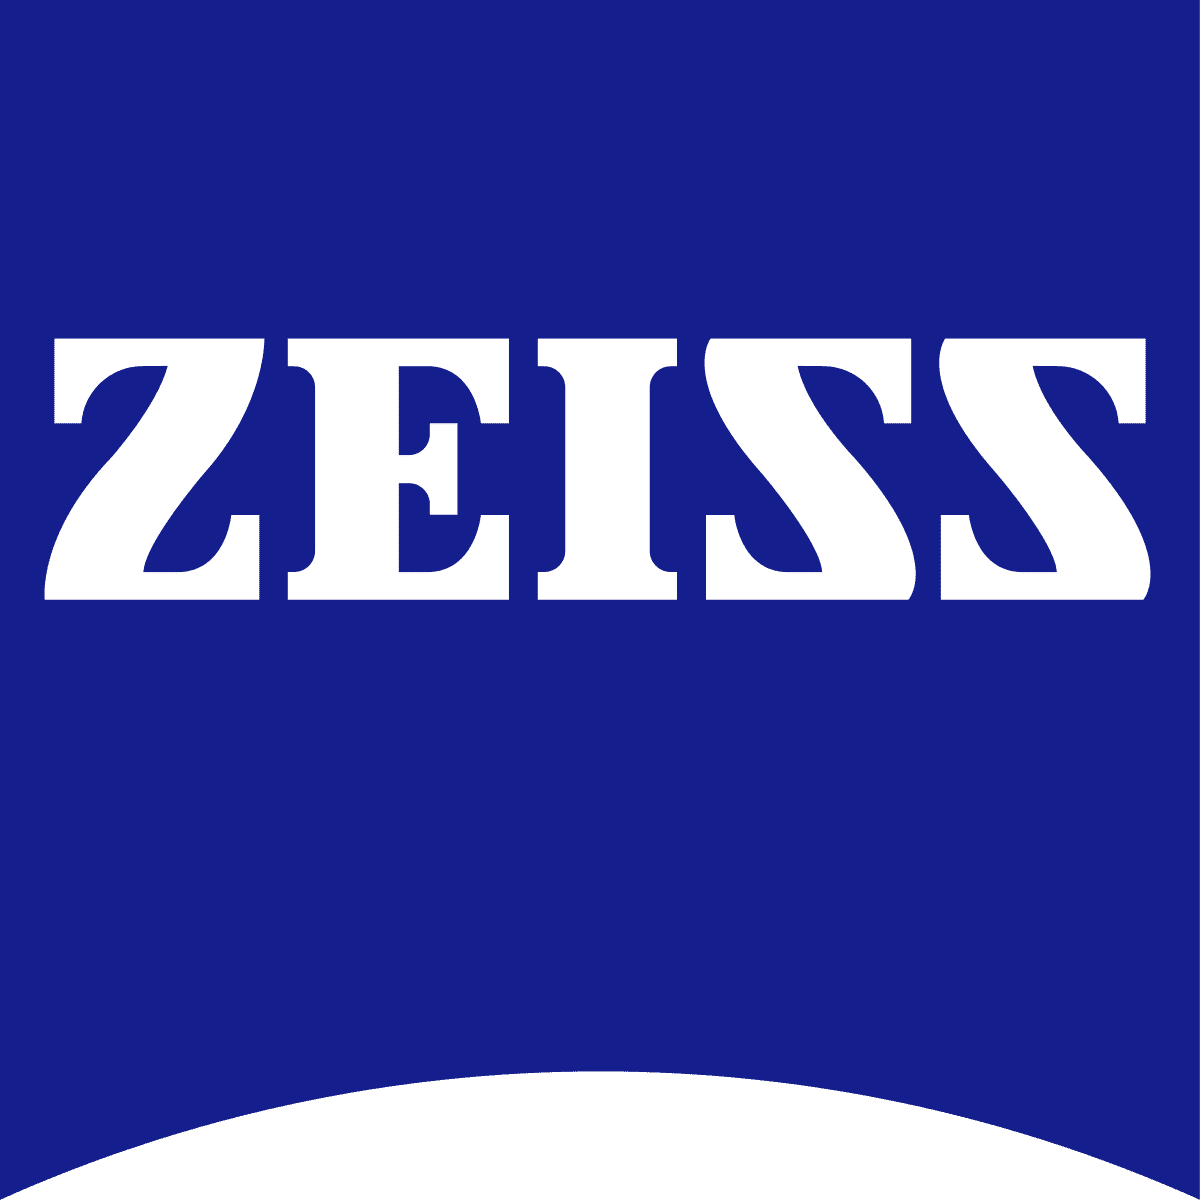 Zeiss logo (opens in a new tab)